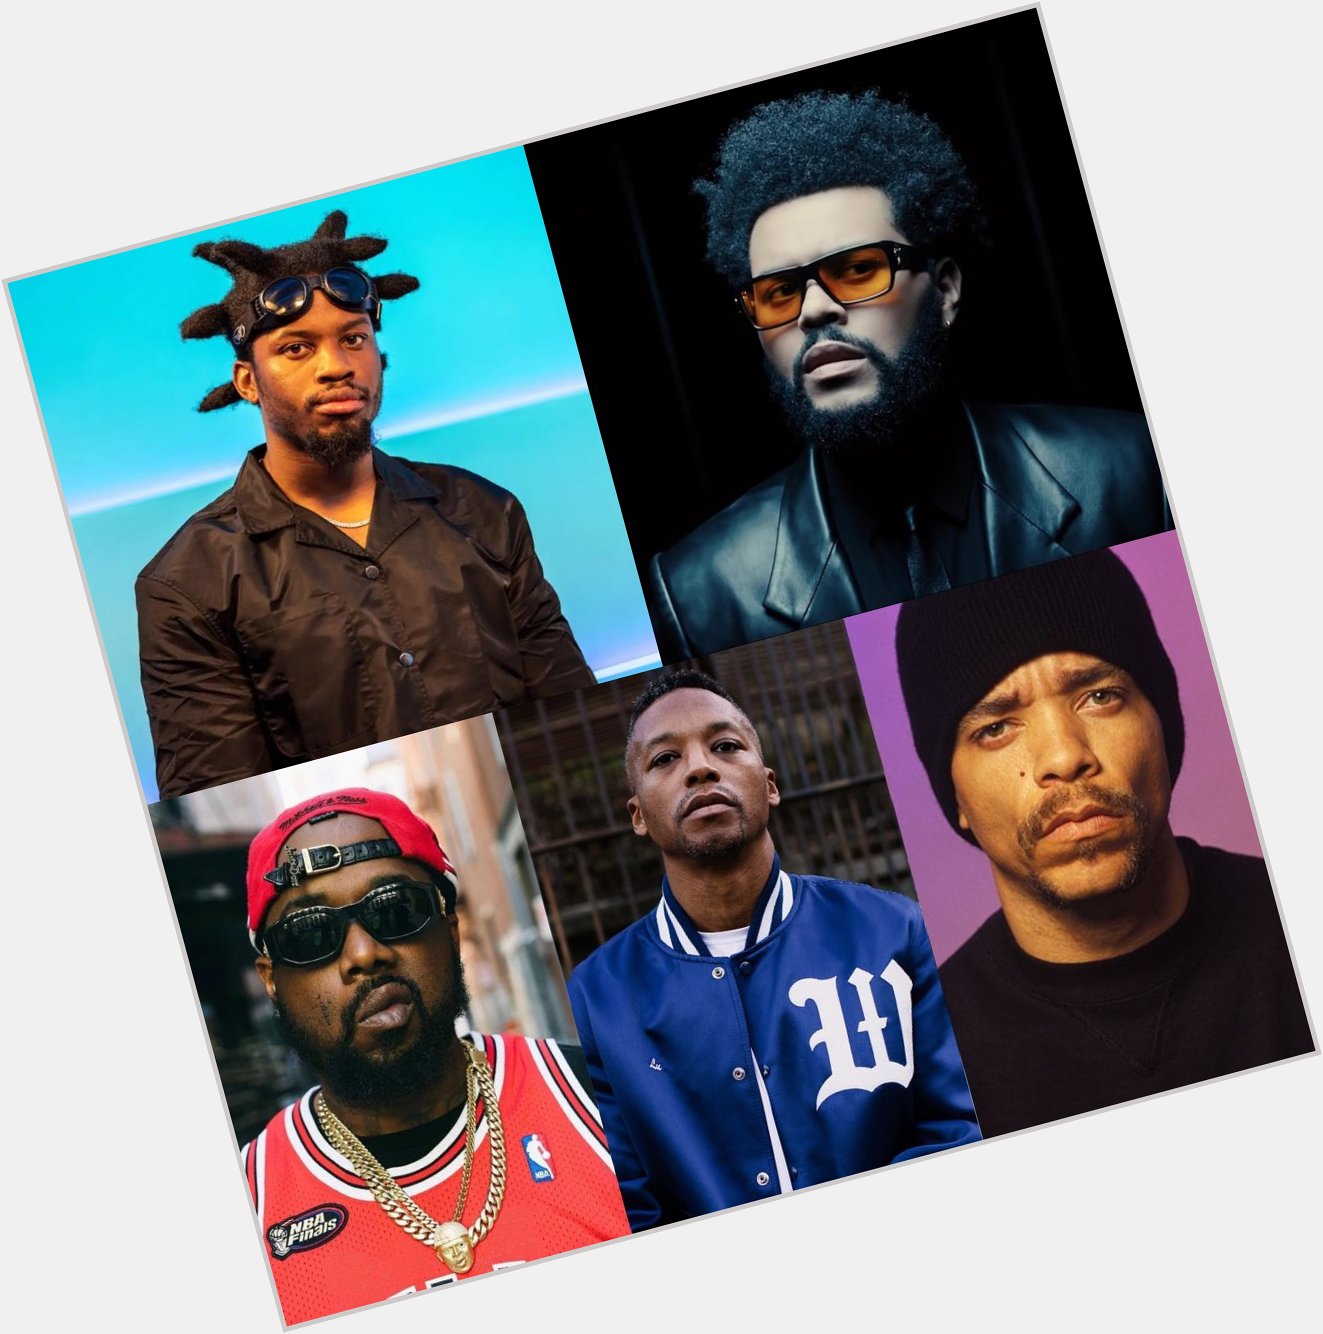 Happy Birthday to Denzel Curry, The Weeknd, Conway The Machine, Lupe Fiasco & Ice-T! 